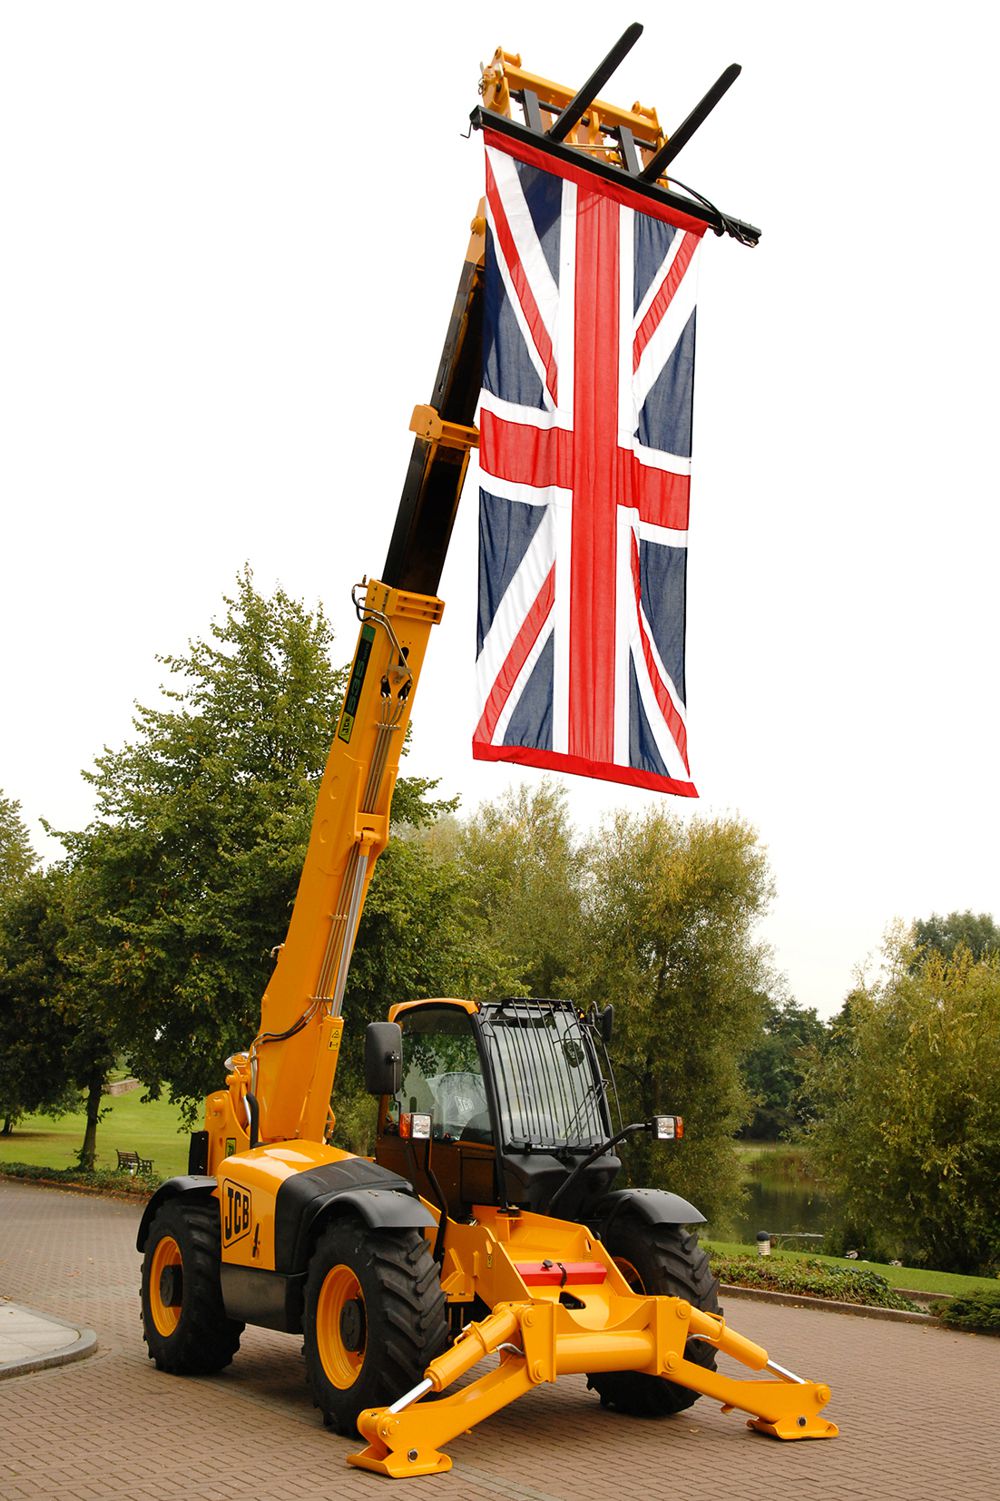 2007 -JCB's Loadall Business Unit wins a Queen's Award for increasing exports by 77%